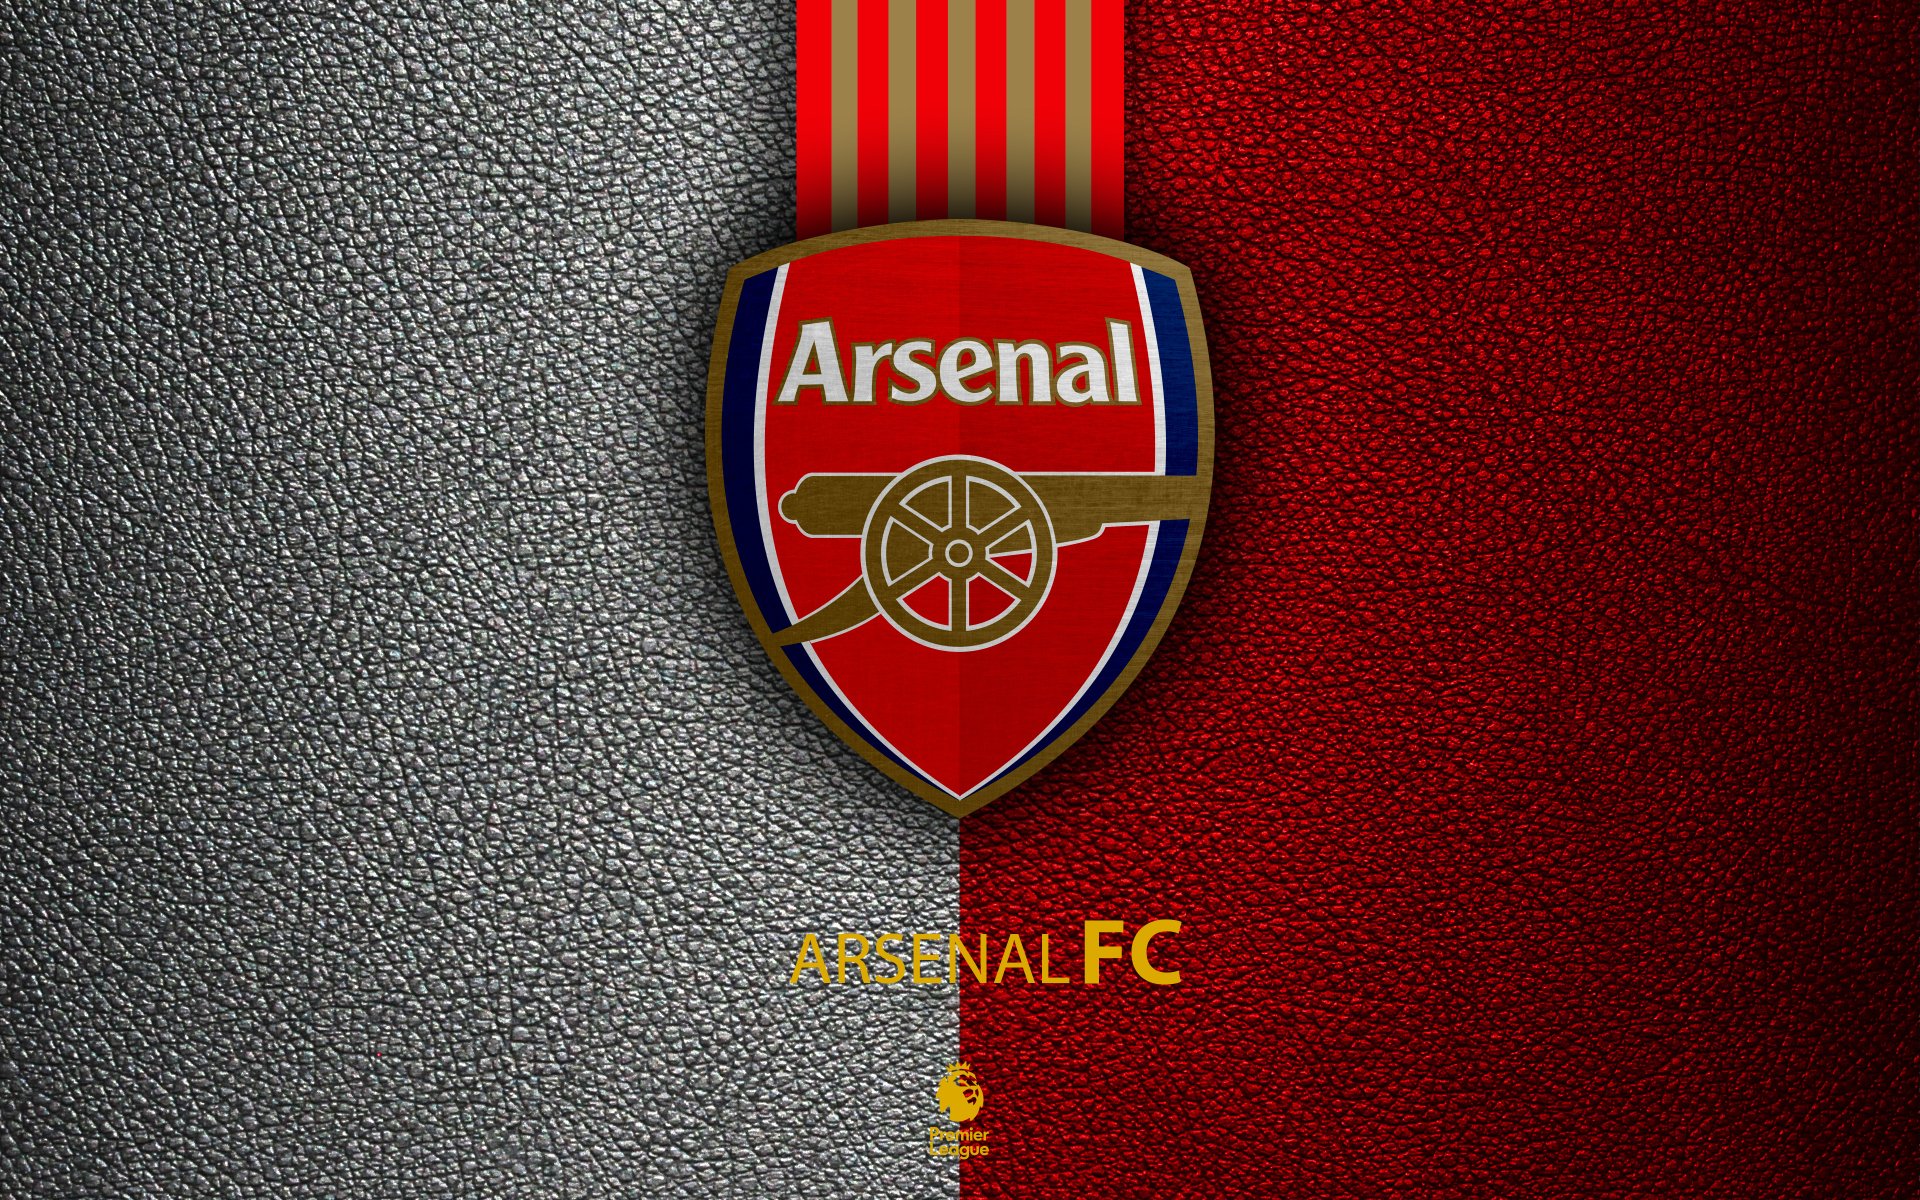 33 4k Ultra Hd Arsenal F C Wallpapers Background Images